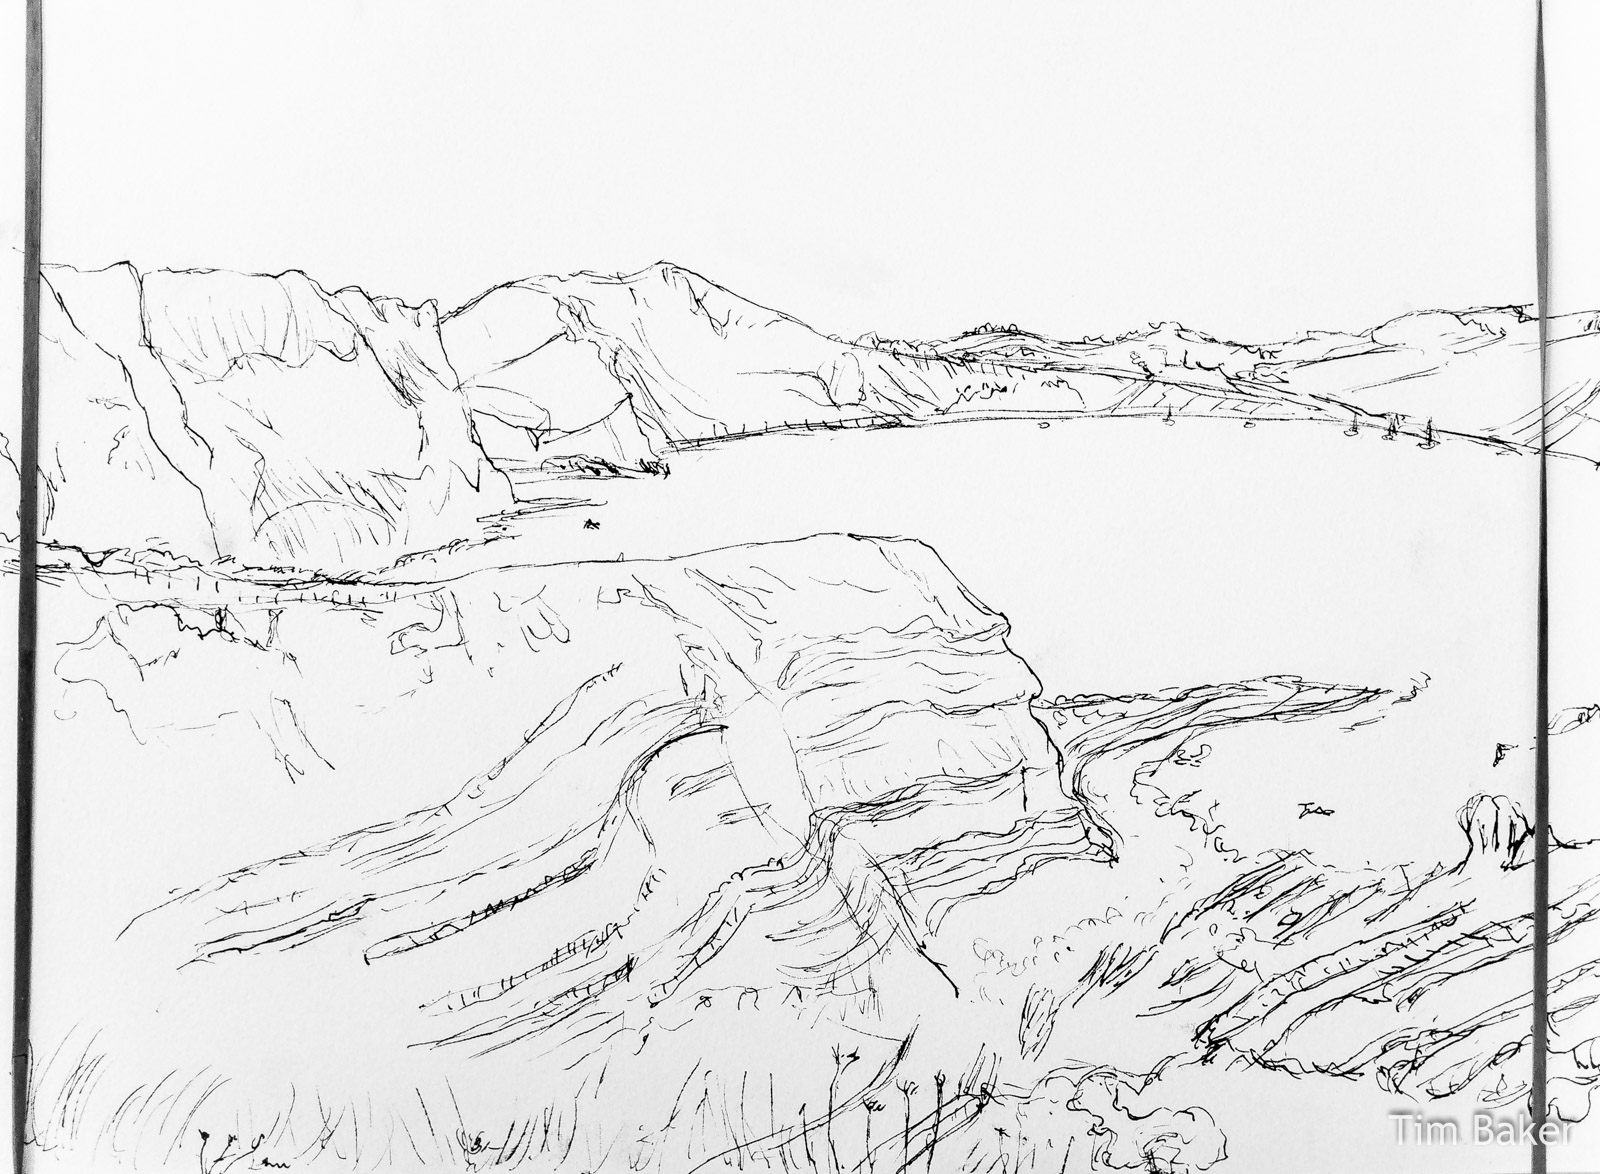 Mupe Bay (in progress) - fountain pen drawing, Fabriano Paper, 38x28cm Dorset Jurassic Coast Lulworth Durdle Door Mupe Bay Seascape Cliffs Sea Painting Drawing